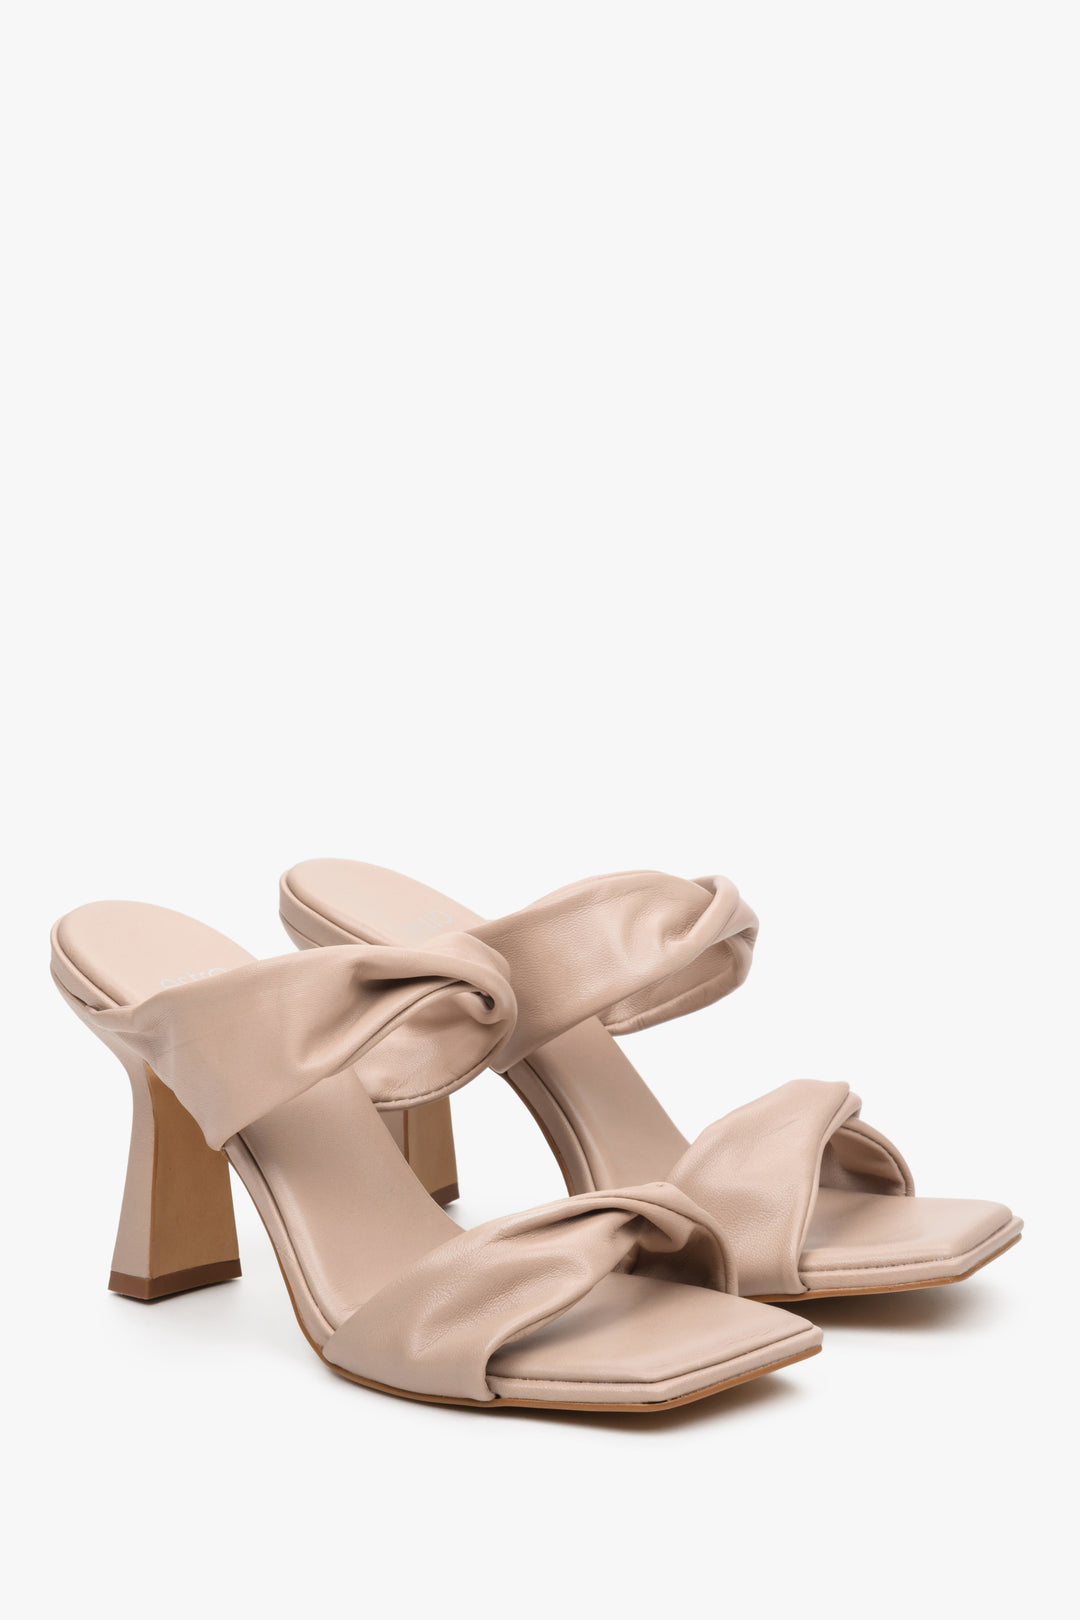 Women's beige leather sandals by Estro with woven straps - close-up on details.